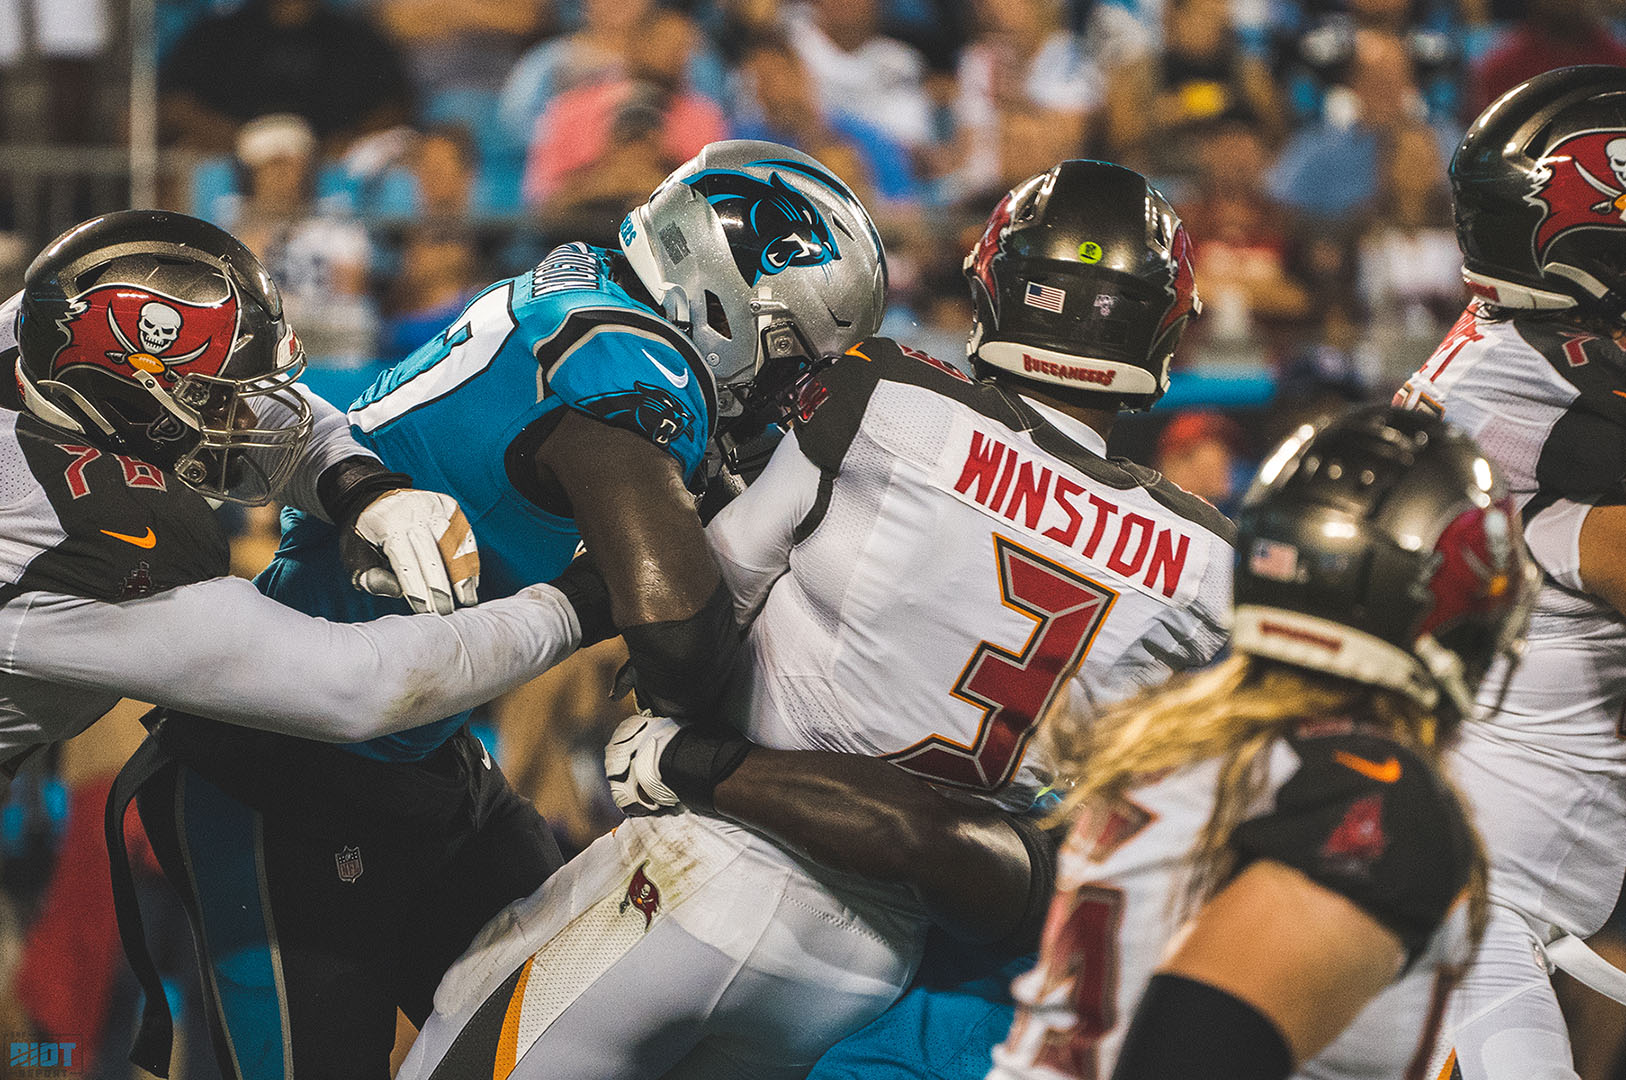 What Has Changed For The Panthers – and the Bucs – Since Week Two